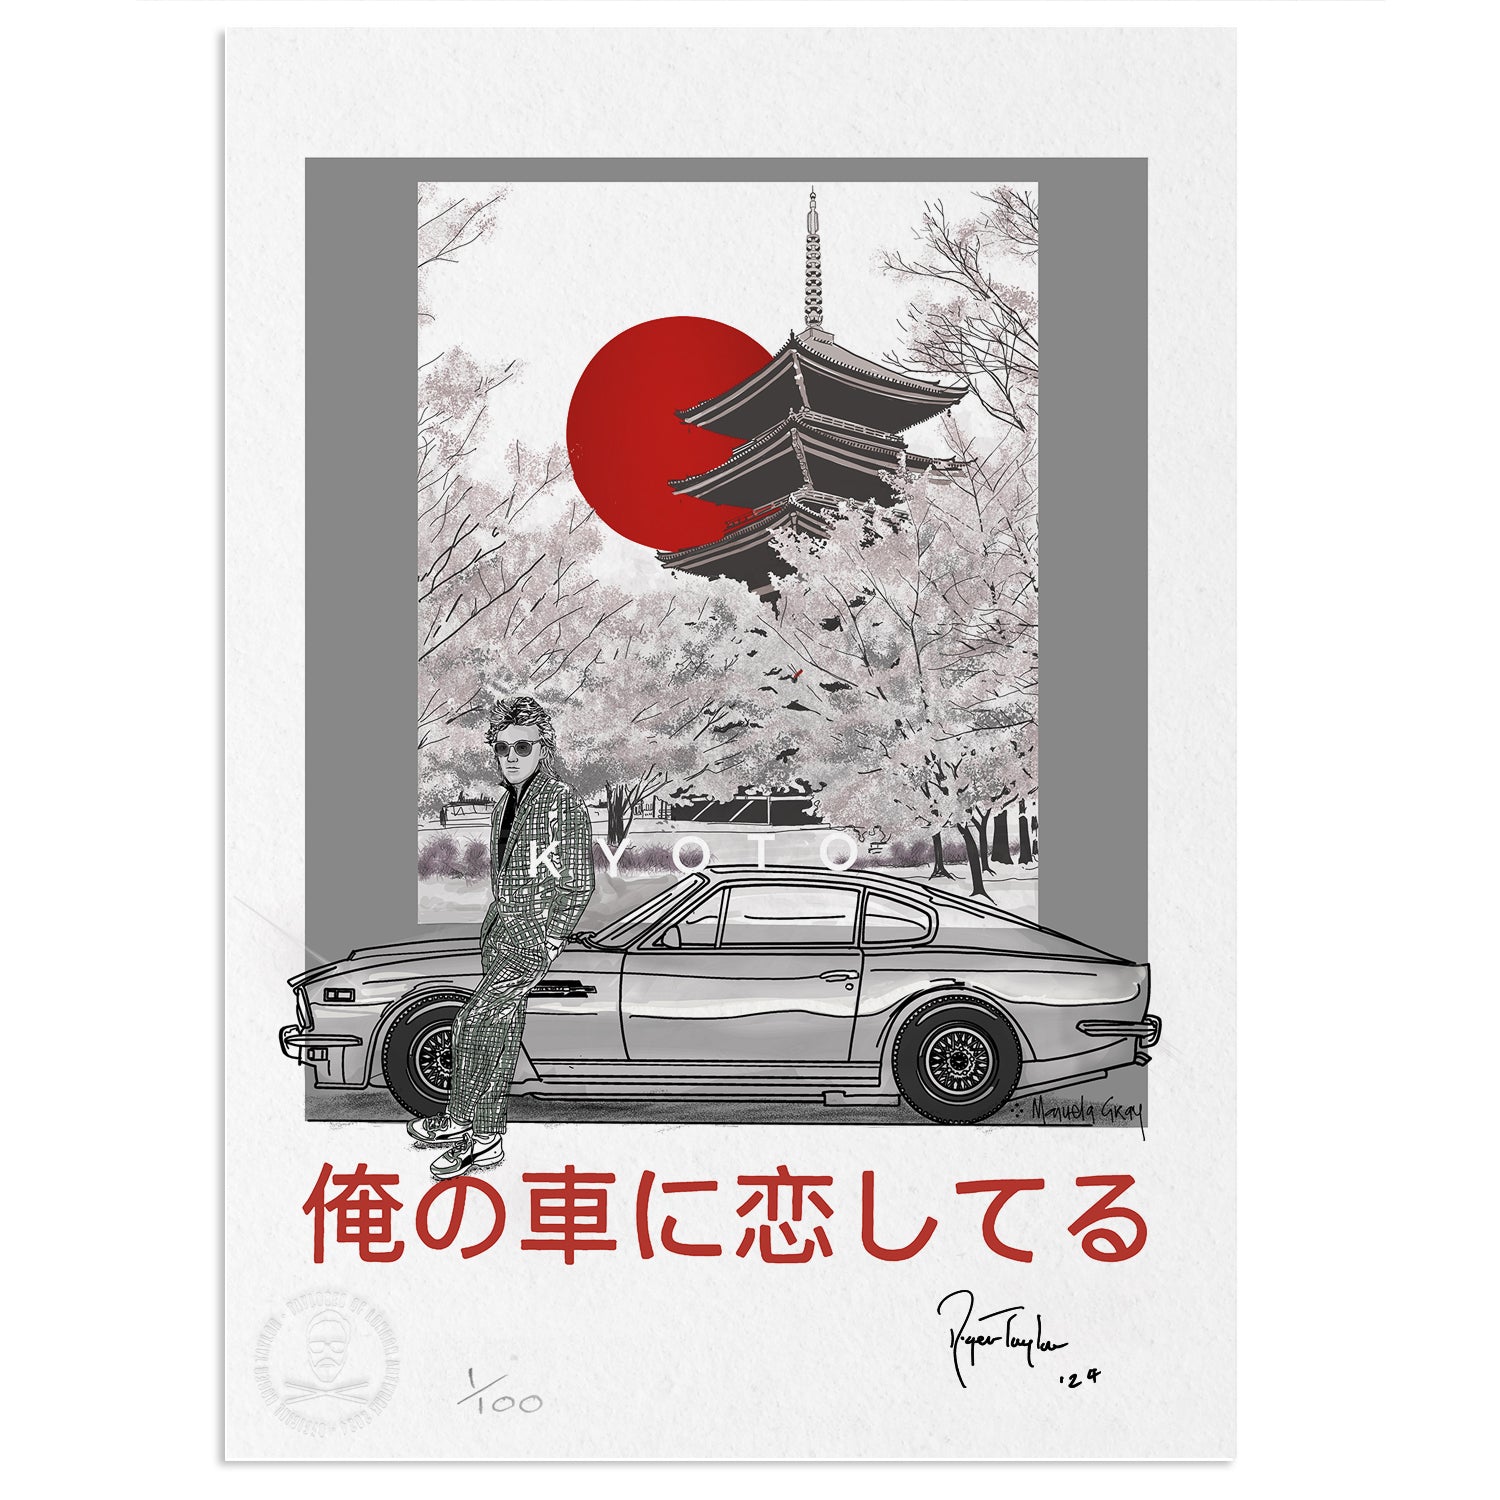 Roger Taylor - Limited Edition Japanese A1 Signed Collectors Lithograph 'KYOTO'